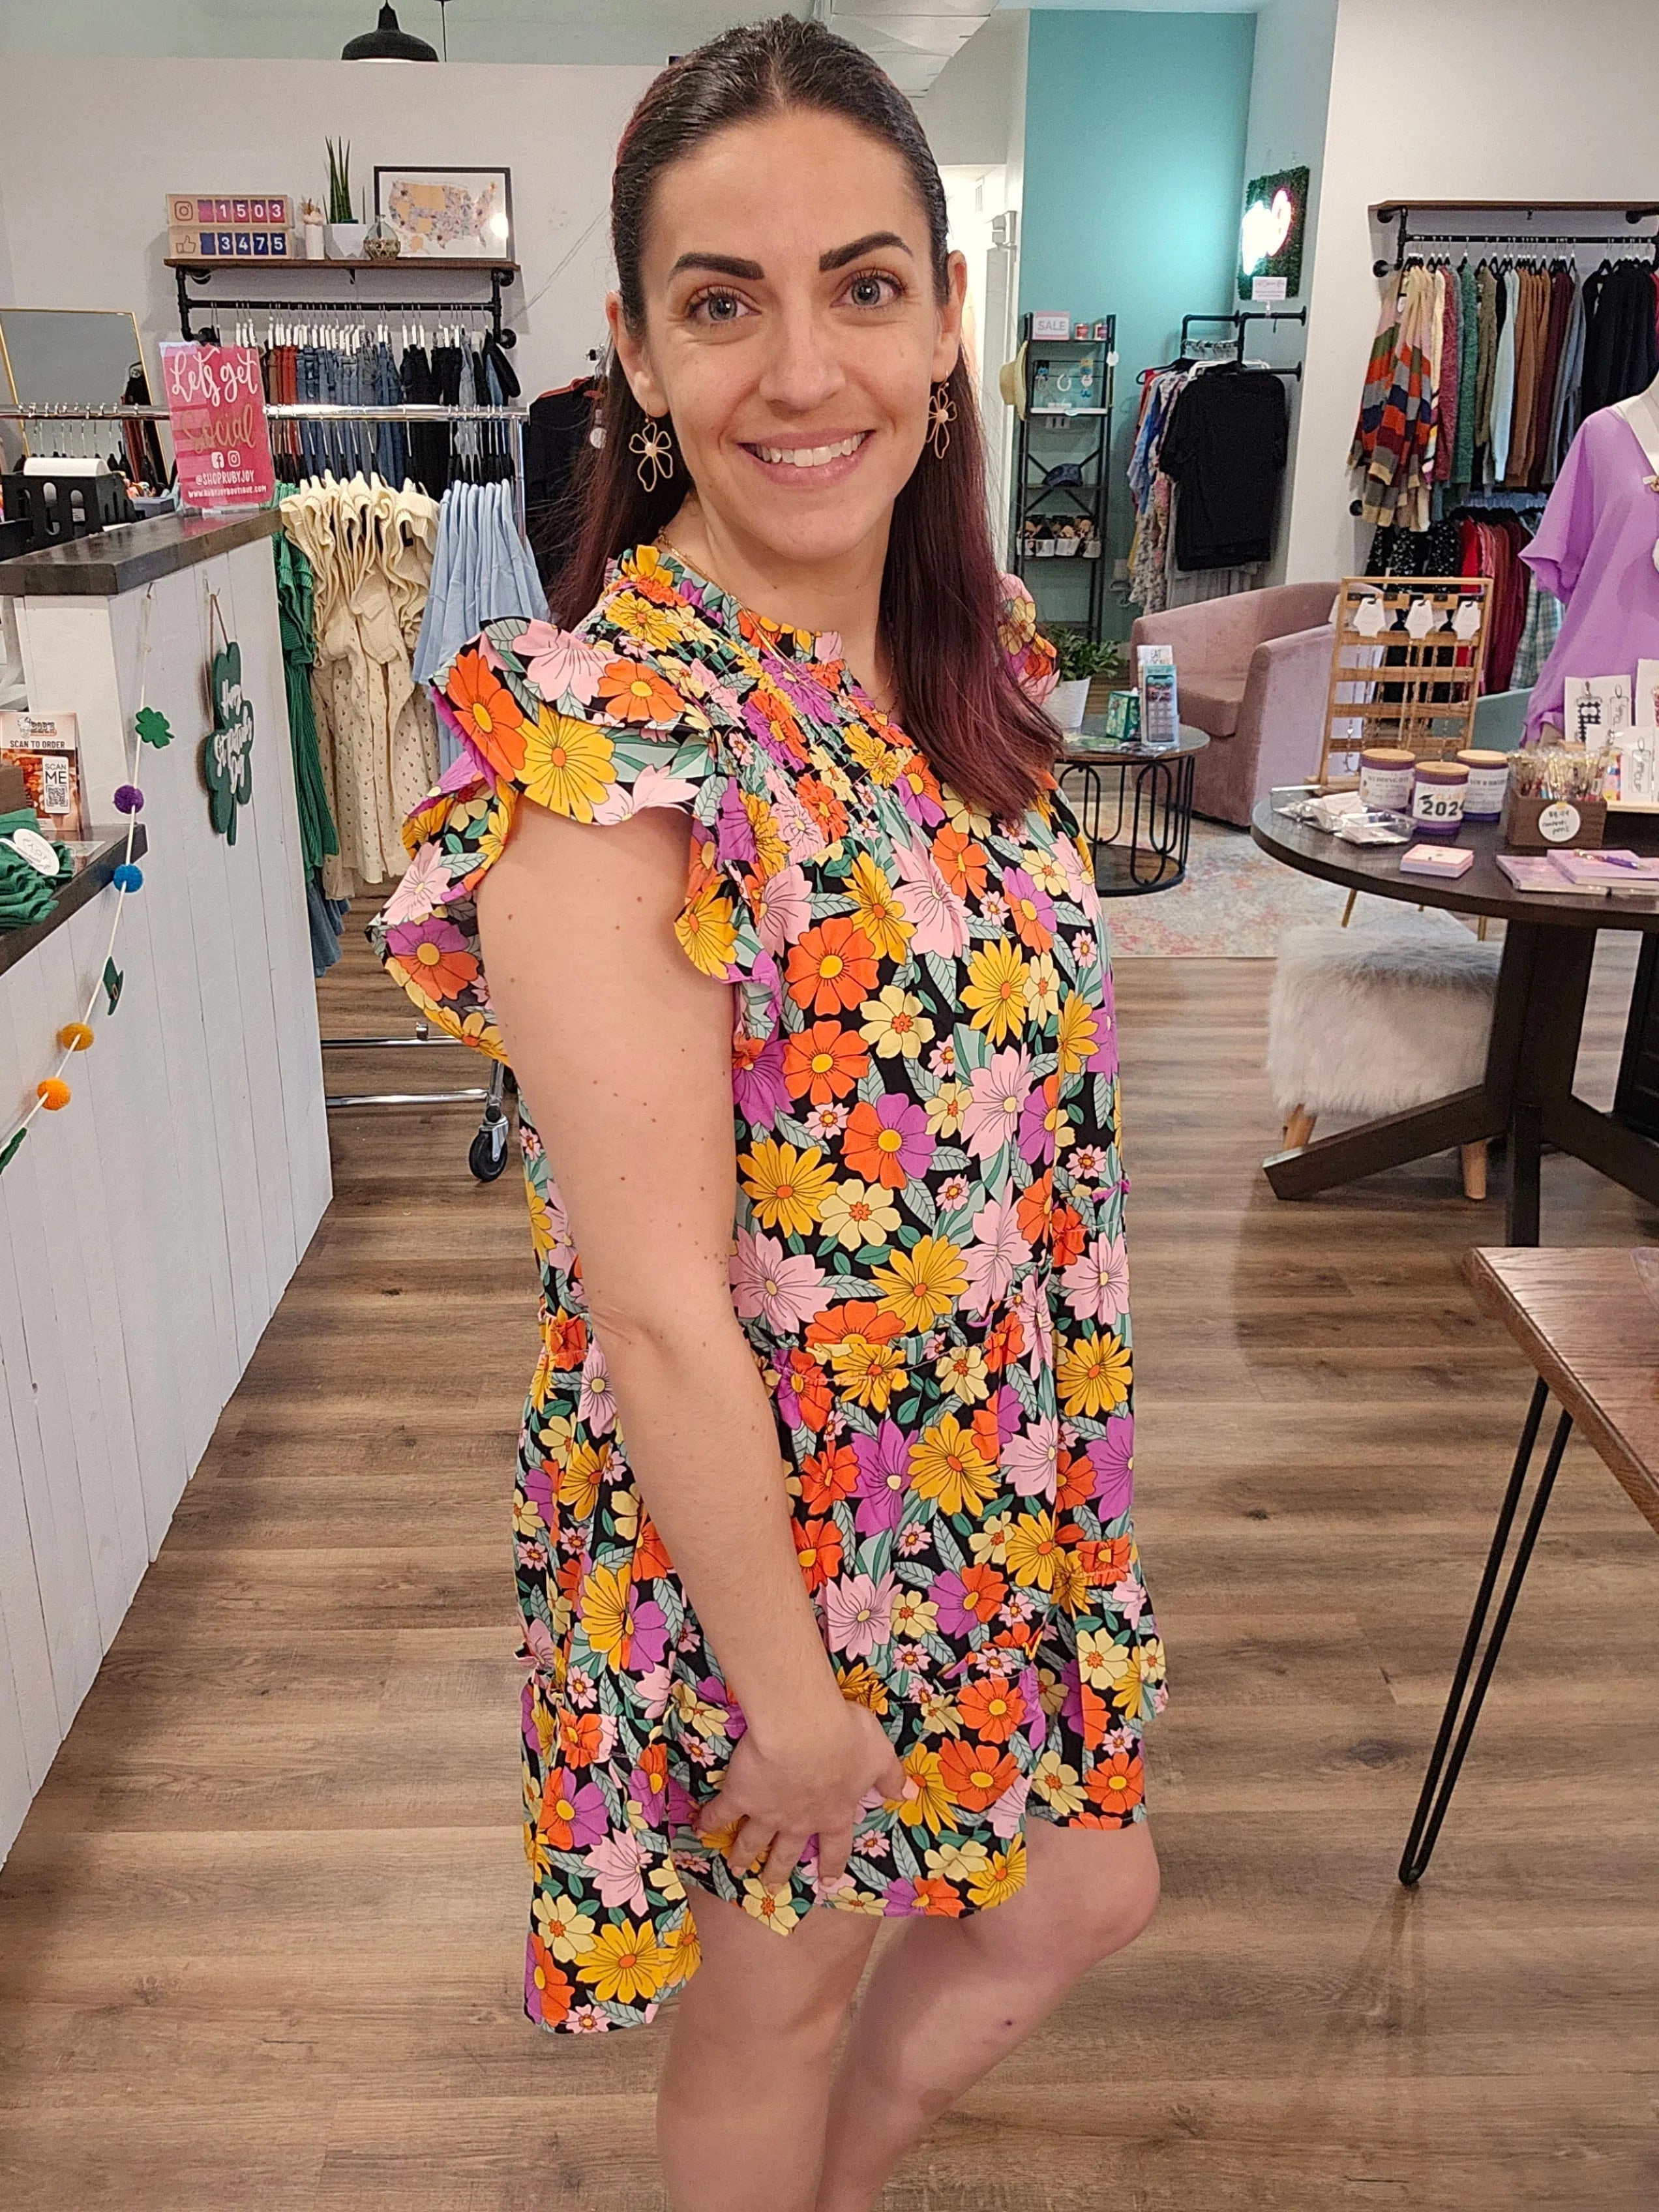 Shop What A Sight Floral Dress-Dresses at Ruby Joy Boutique, a Women's Clothing Store in Pickerington, Ohio